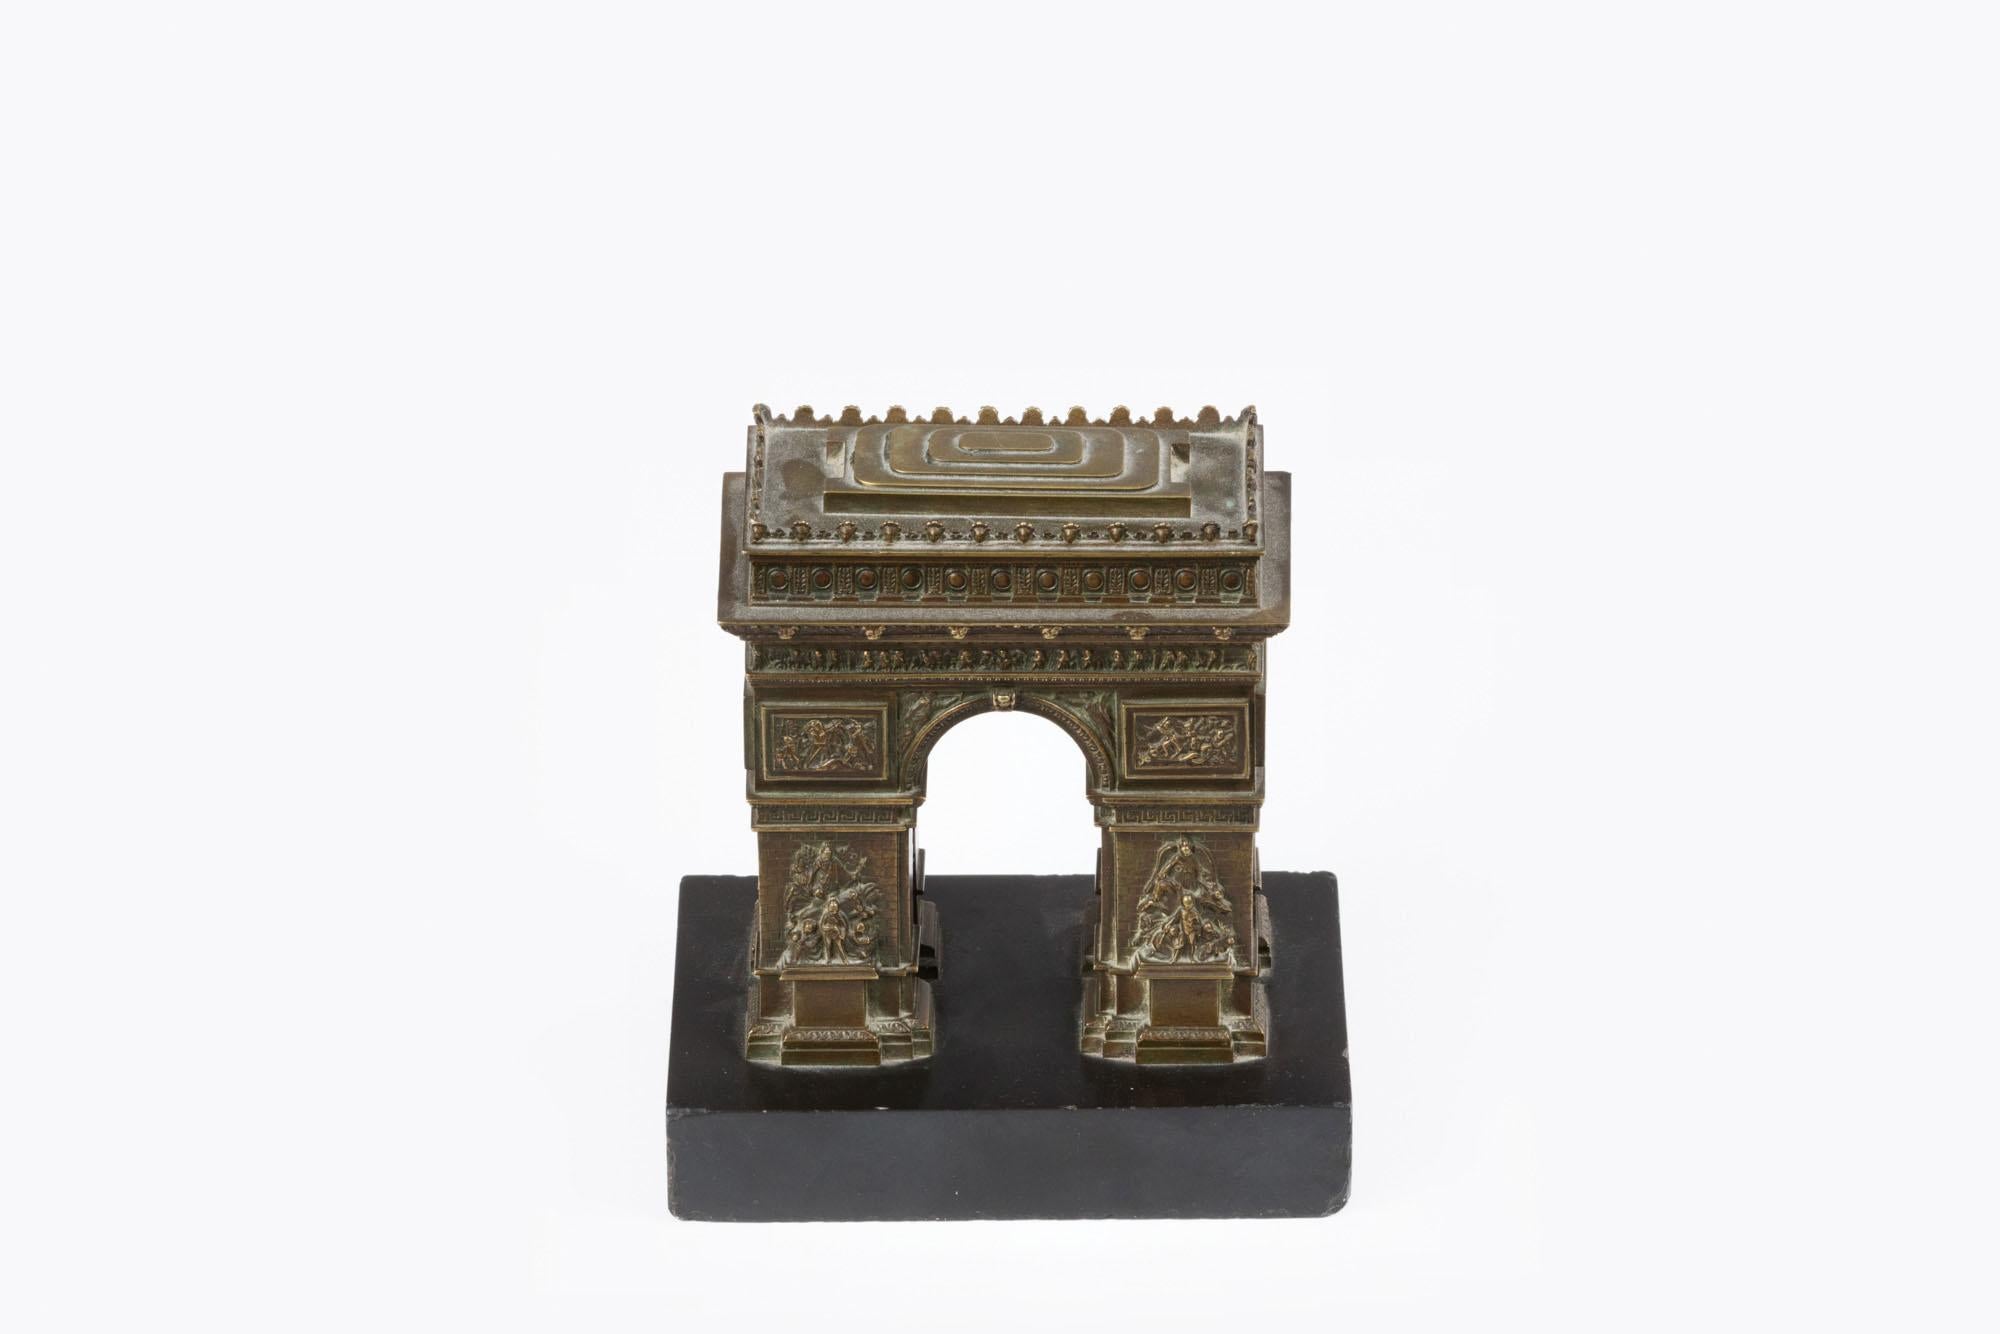 19th Century bronze in the form of the Arc de Triomphe, Paris, mounted on marble base. The arch’s decorative form embodies the Neoclassical style of sculpture from the first half of the nineteenth century and is in honour of those who fought for